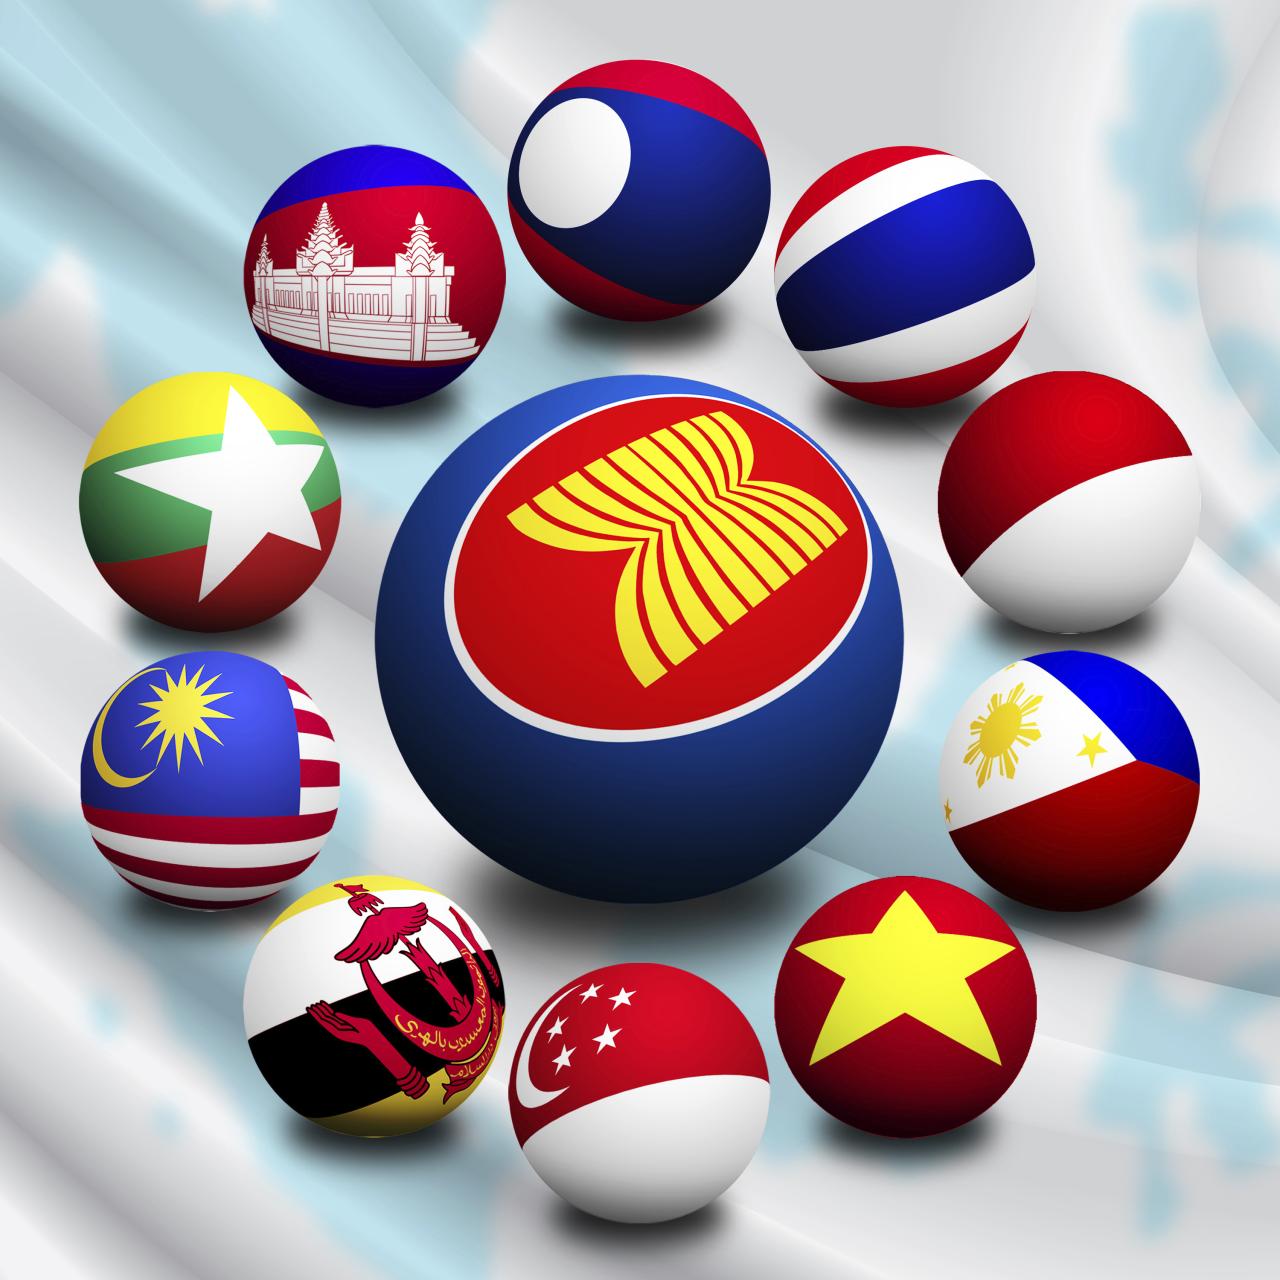 Asean countries competition between